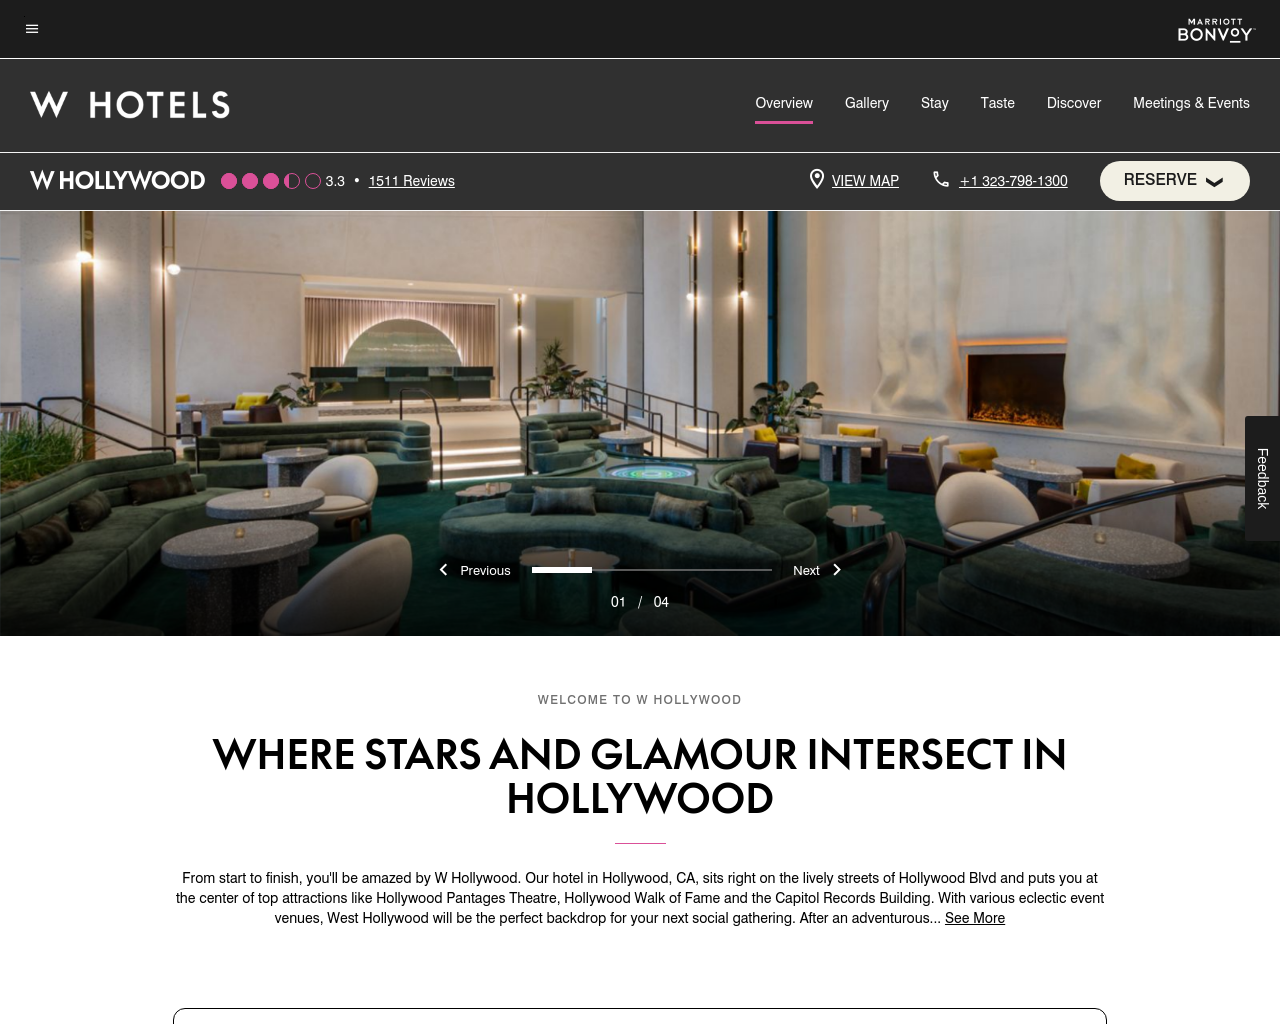 whollywoodhotel.com